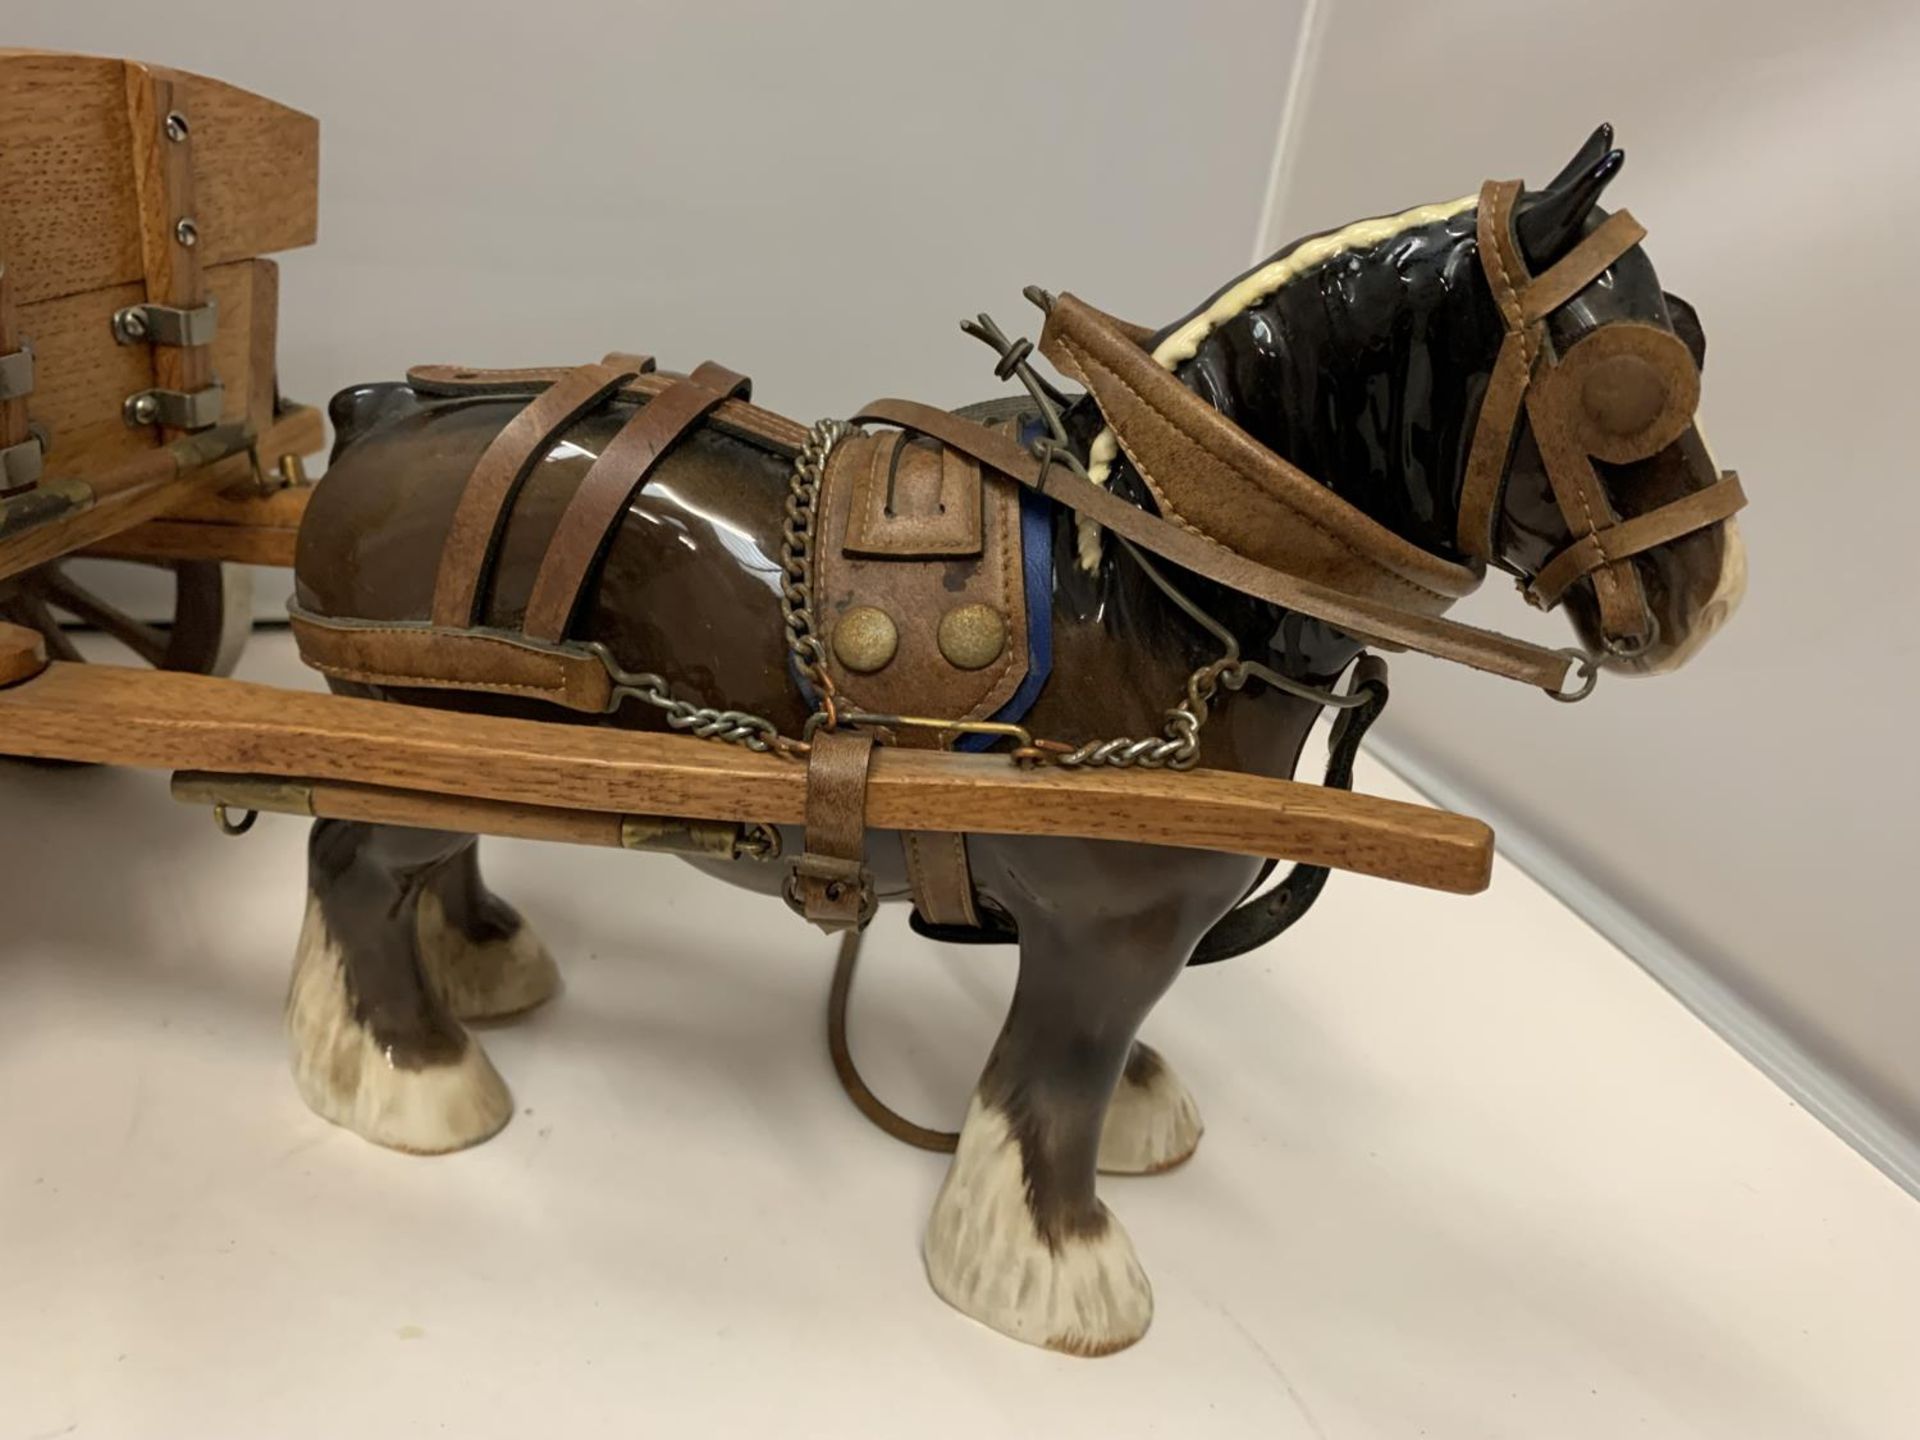 A BESWICK SHIRE HORSE WITH WOODEN CART - Image 2 of 3